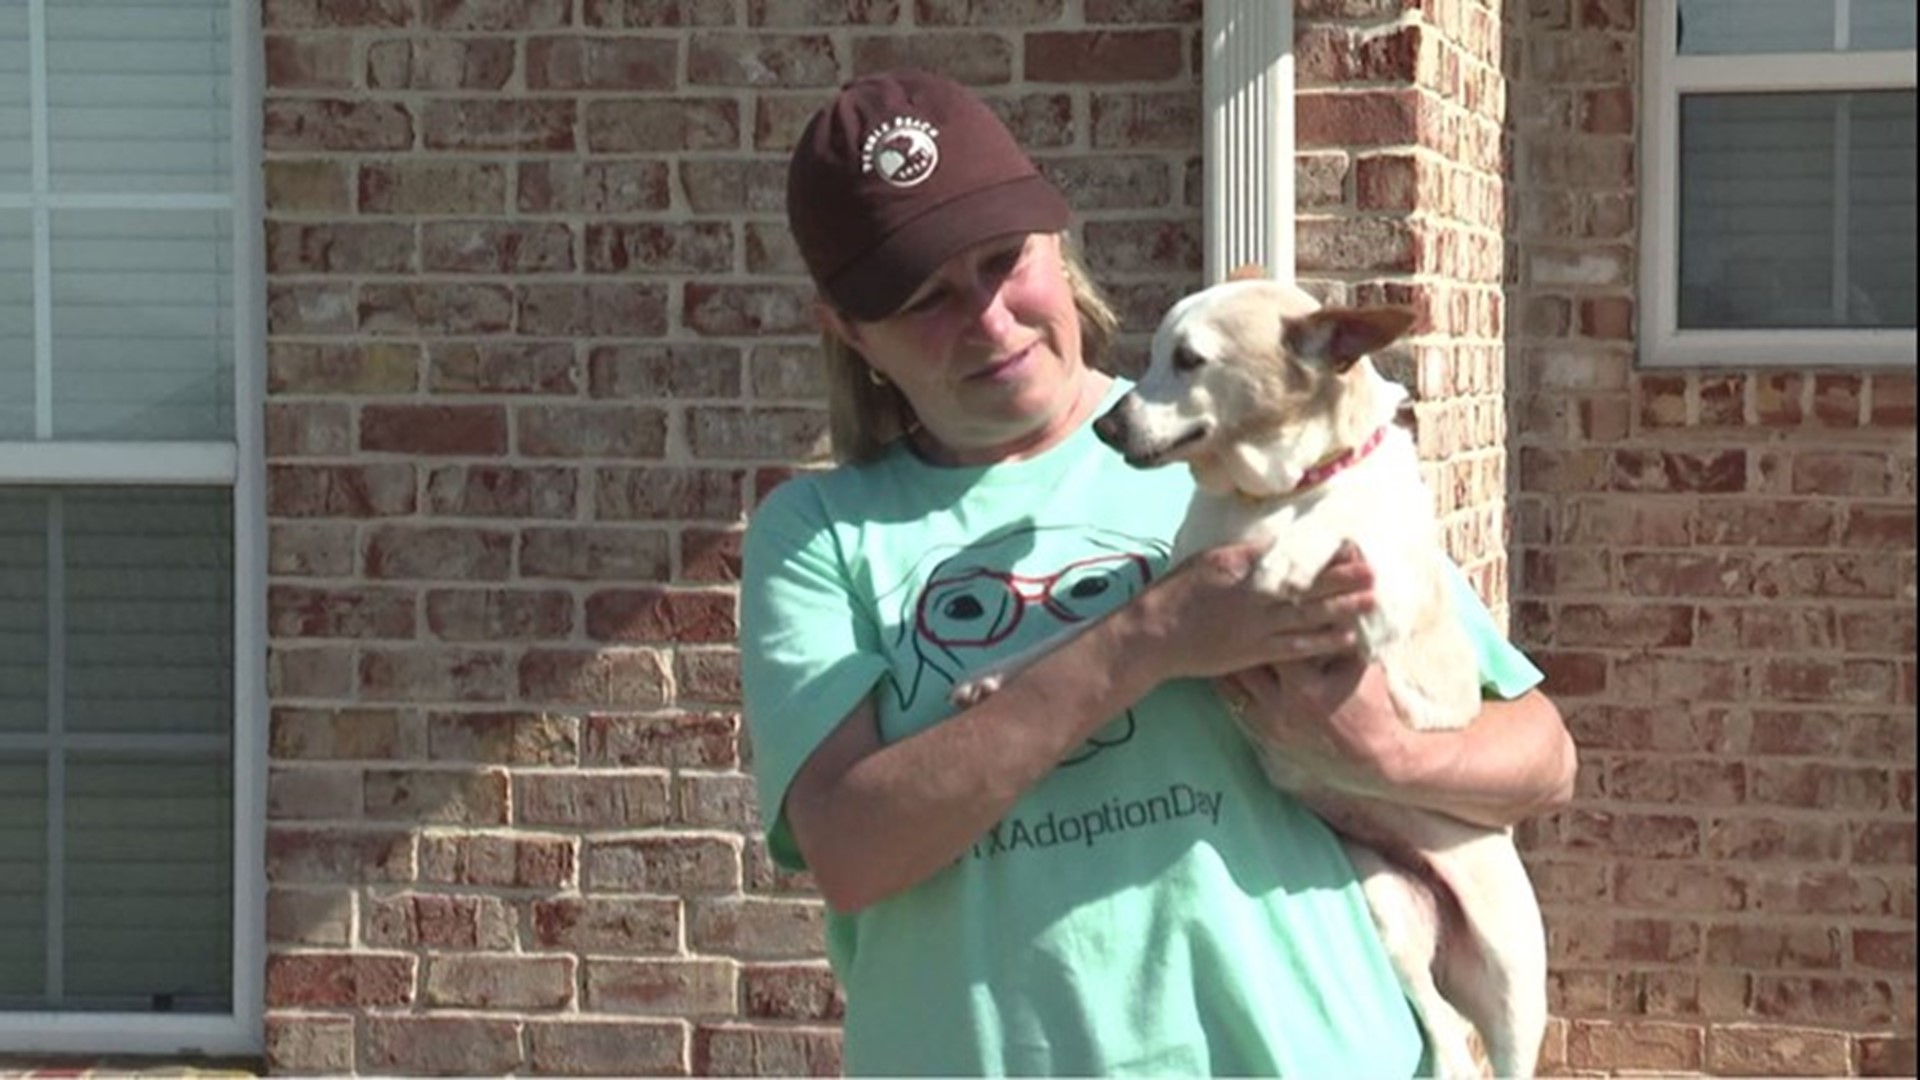 It was the Favreaus retirement dream to help animals no one else wanted. At Woofhaven Farm, the Central Texas couple gives foster dogs new hope.